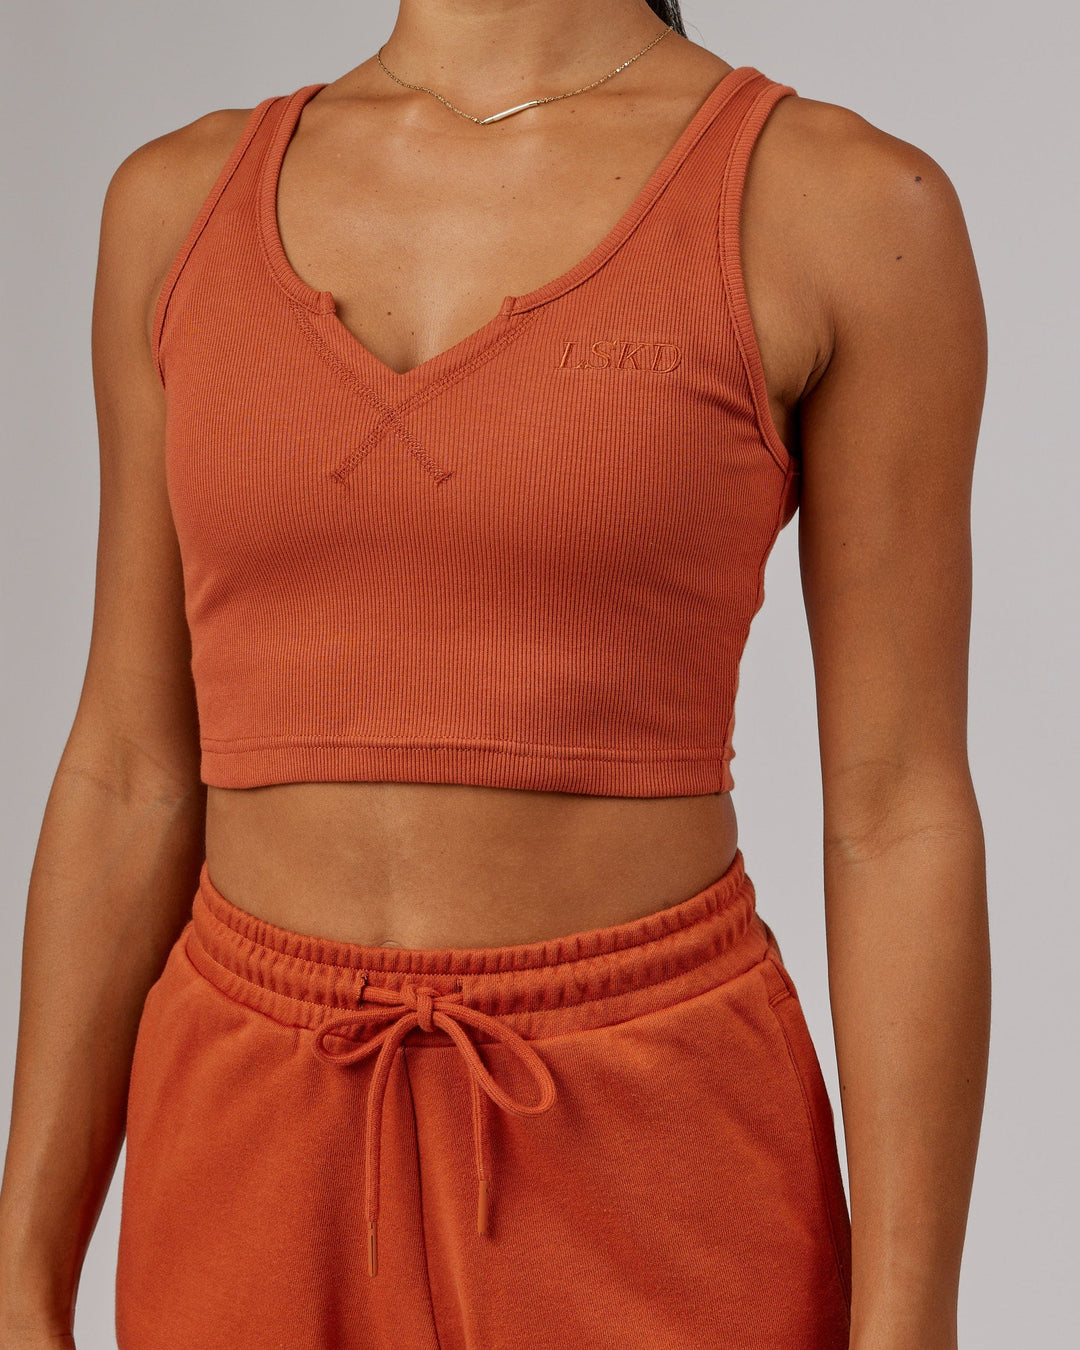 The North Face A5 Red & Orange Cropped Tank Top Built In Bra Size XL